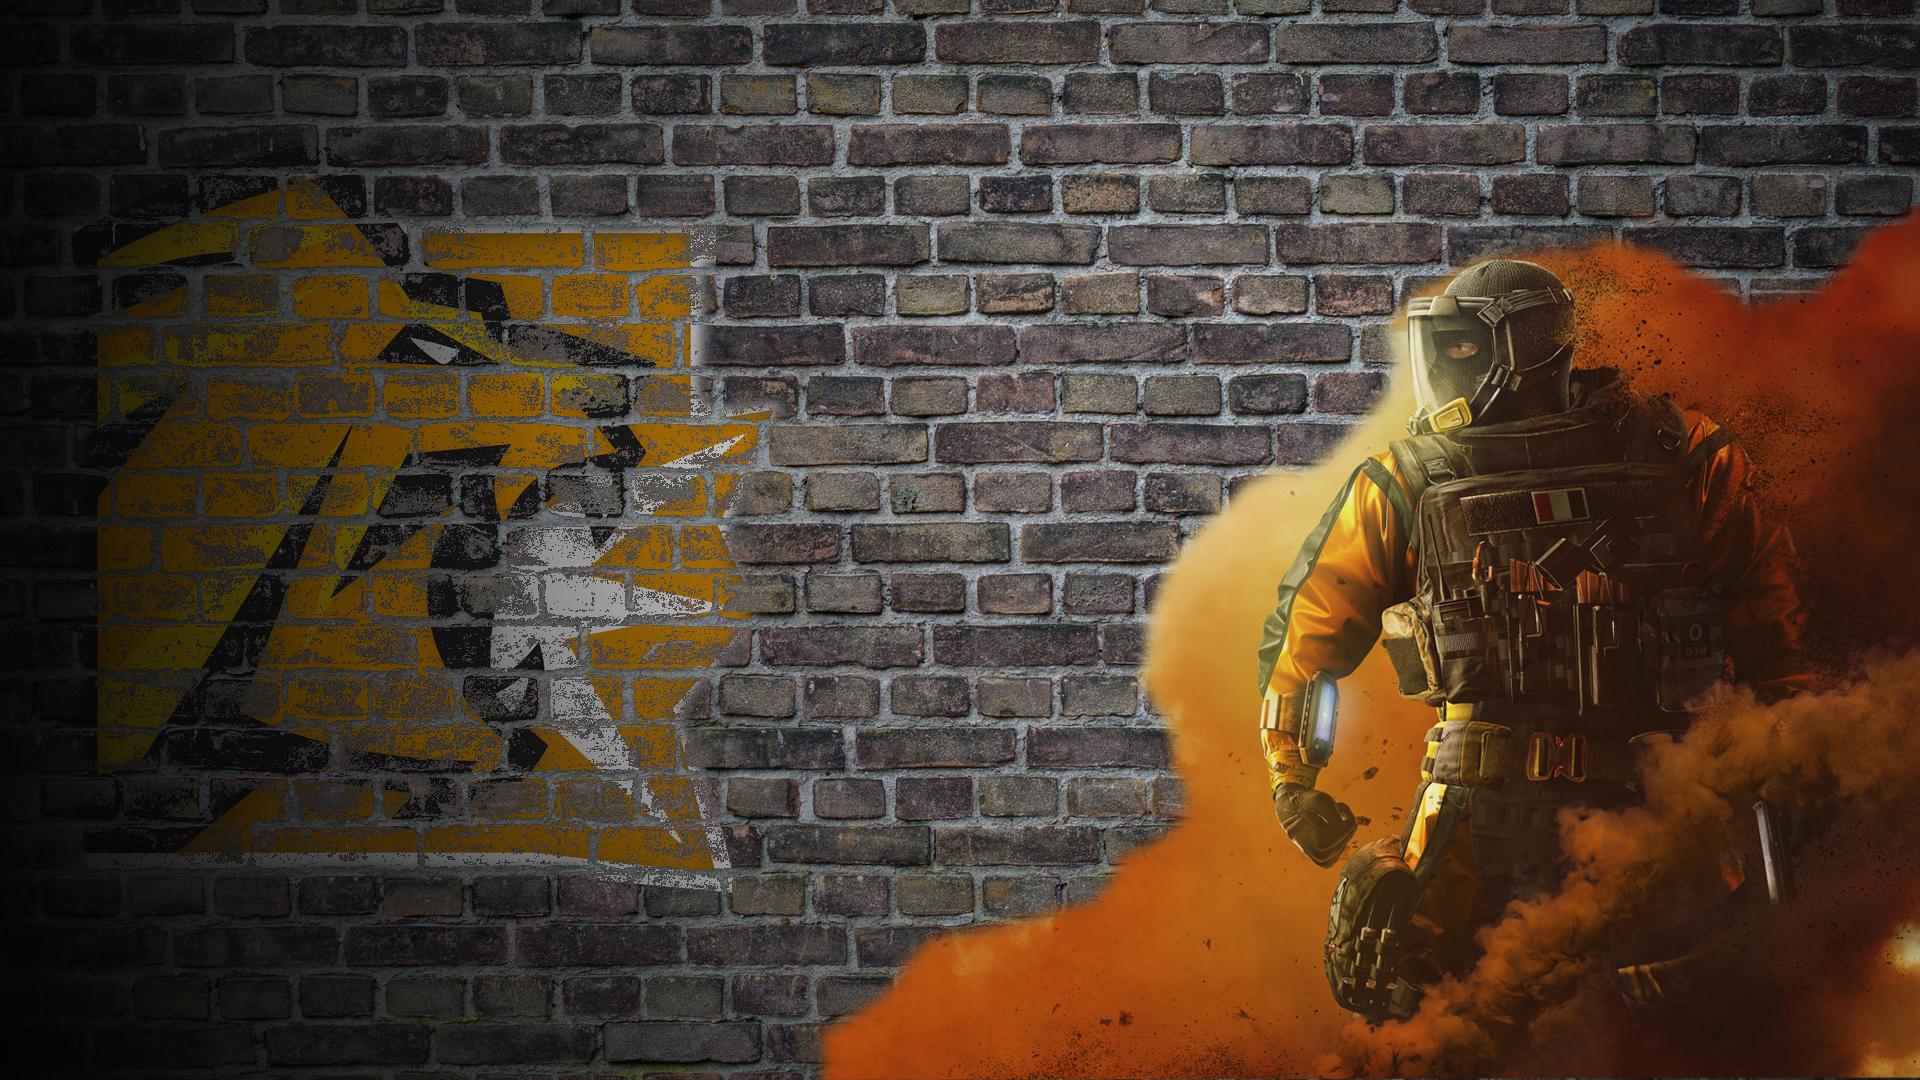 Lion wallpaper i made. feel free to use it